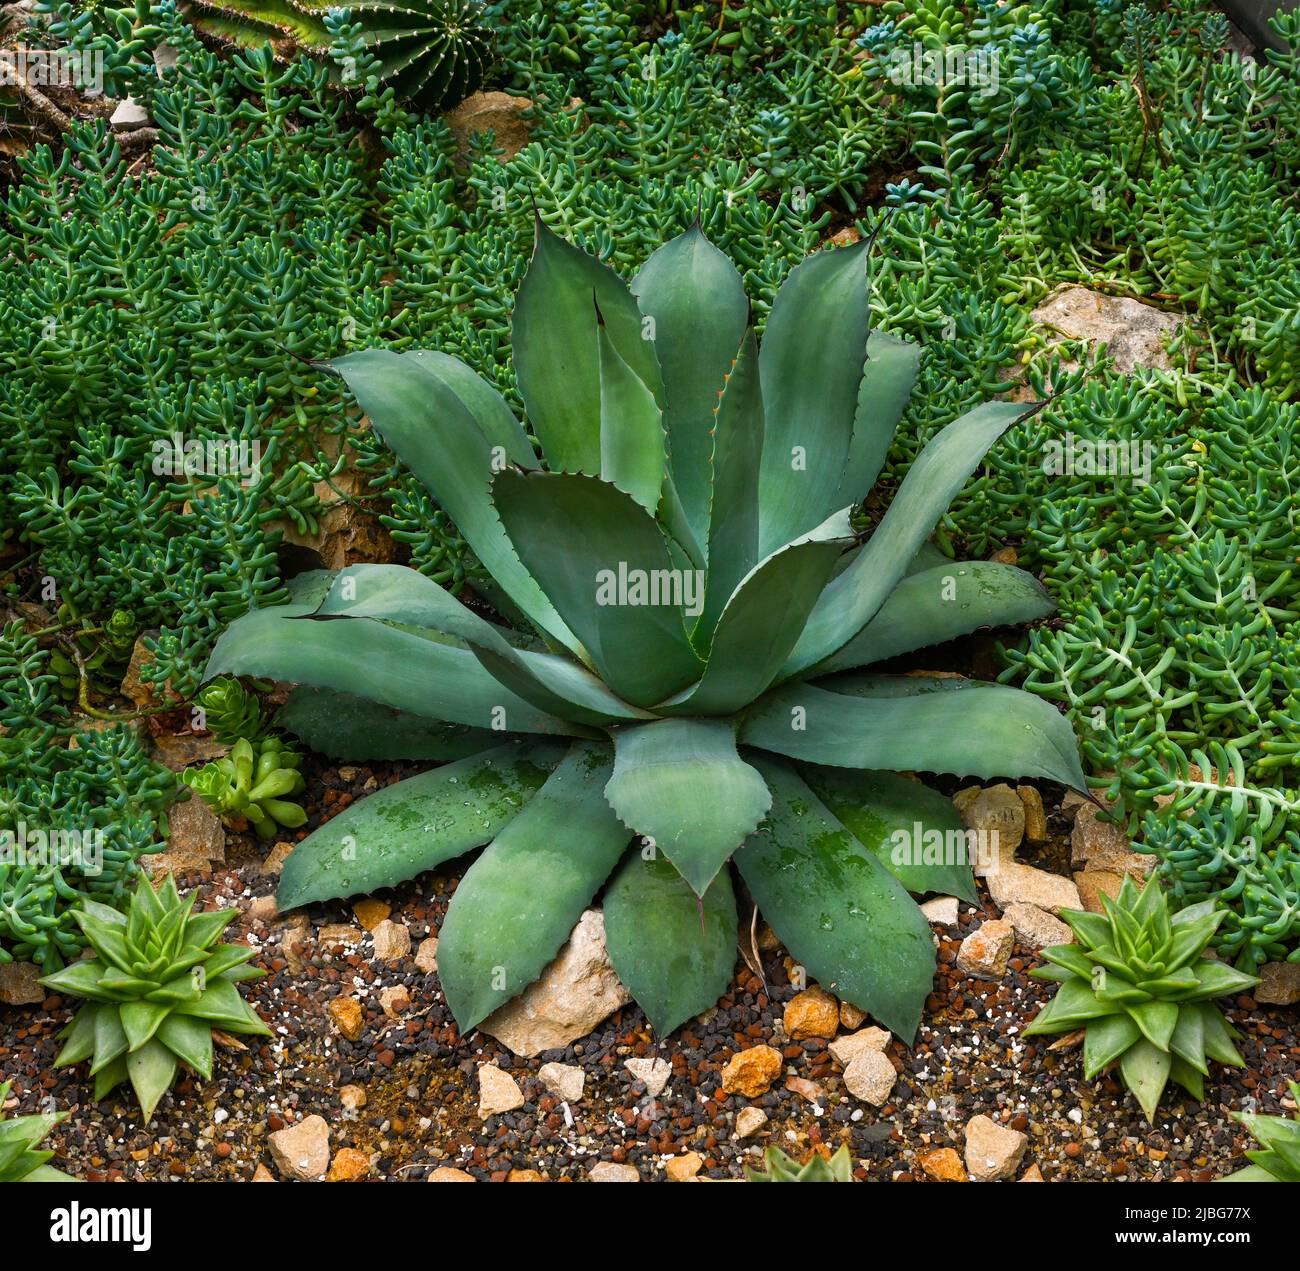 Parry‘s agave or mescal agave (Agave parryi), Agavaceae. Stock Photo